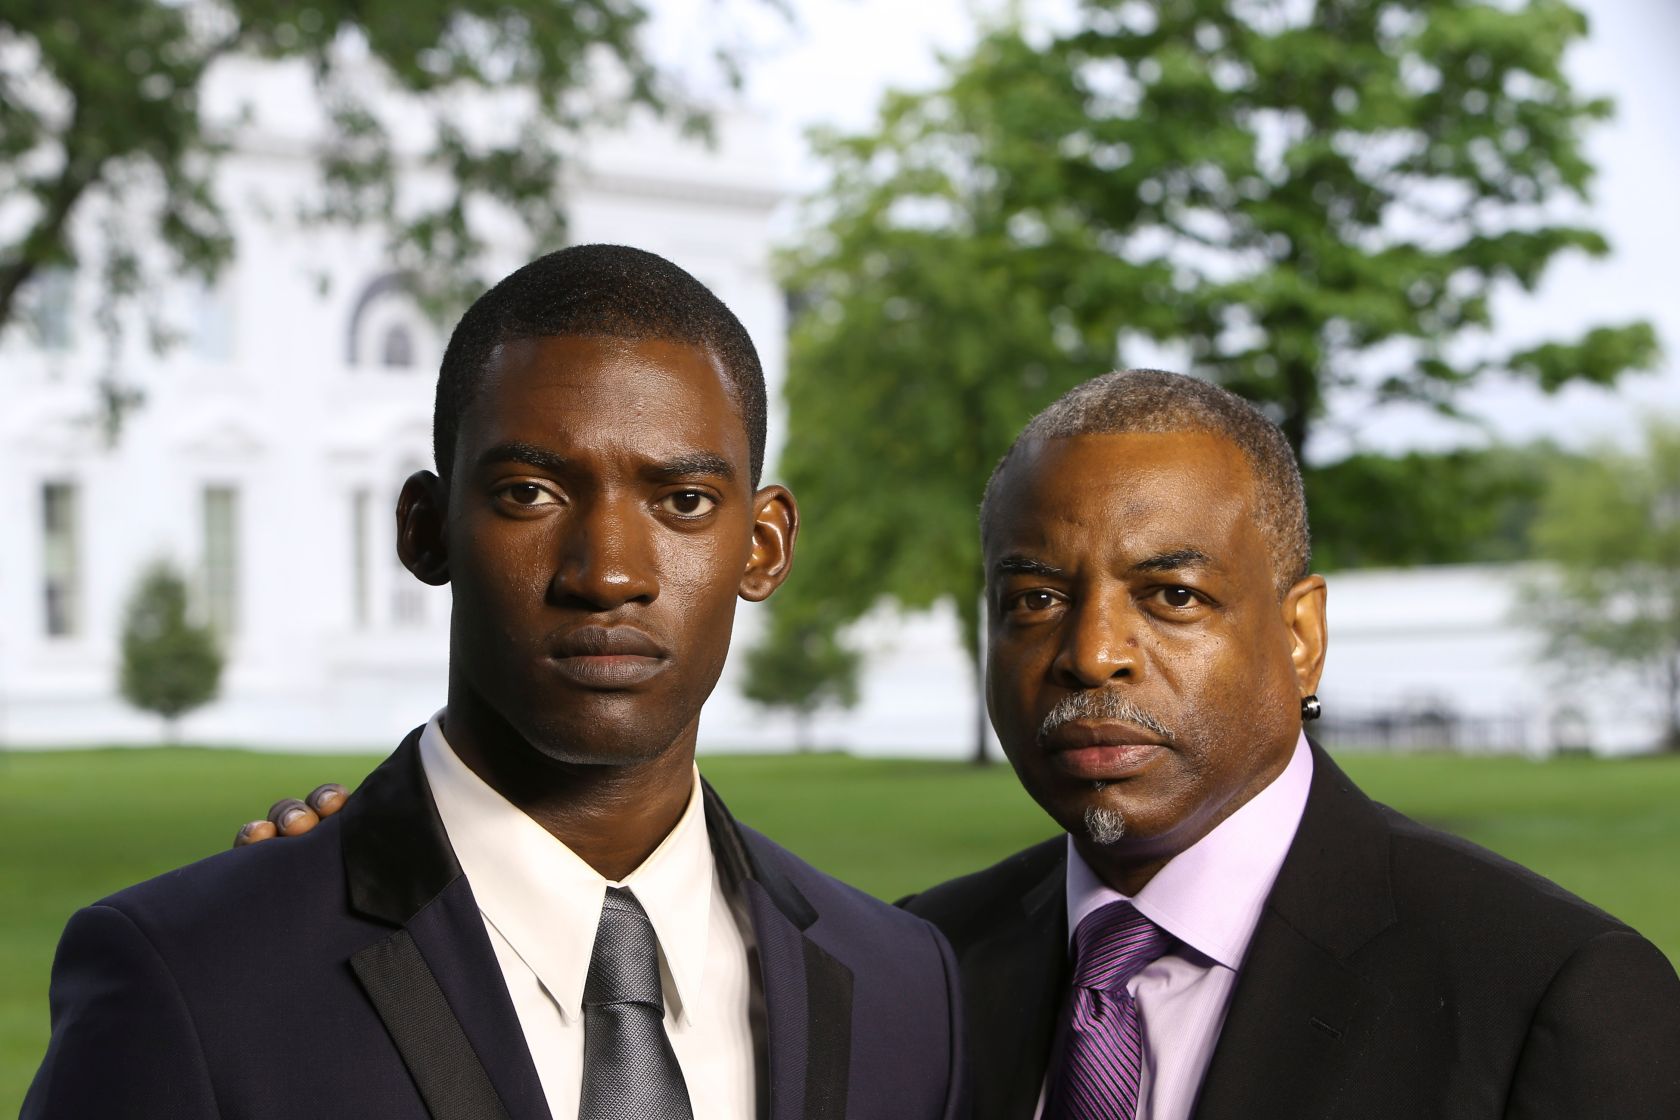 HISTORY Brings 'Roots' Cast And Crew To The White House For Screening